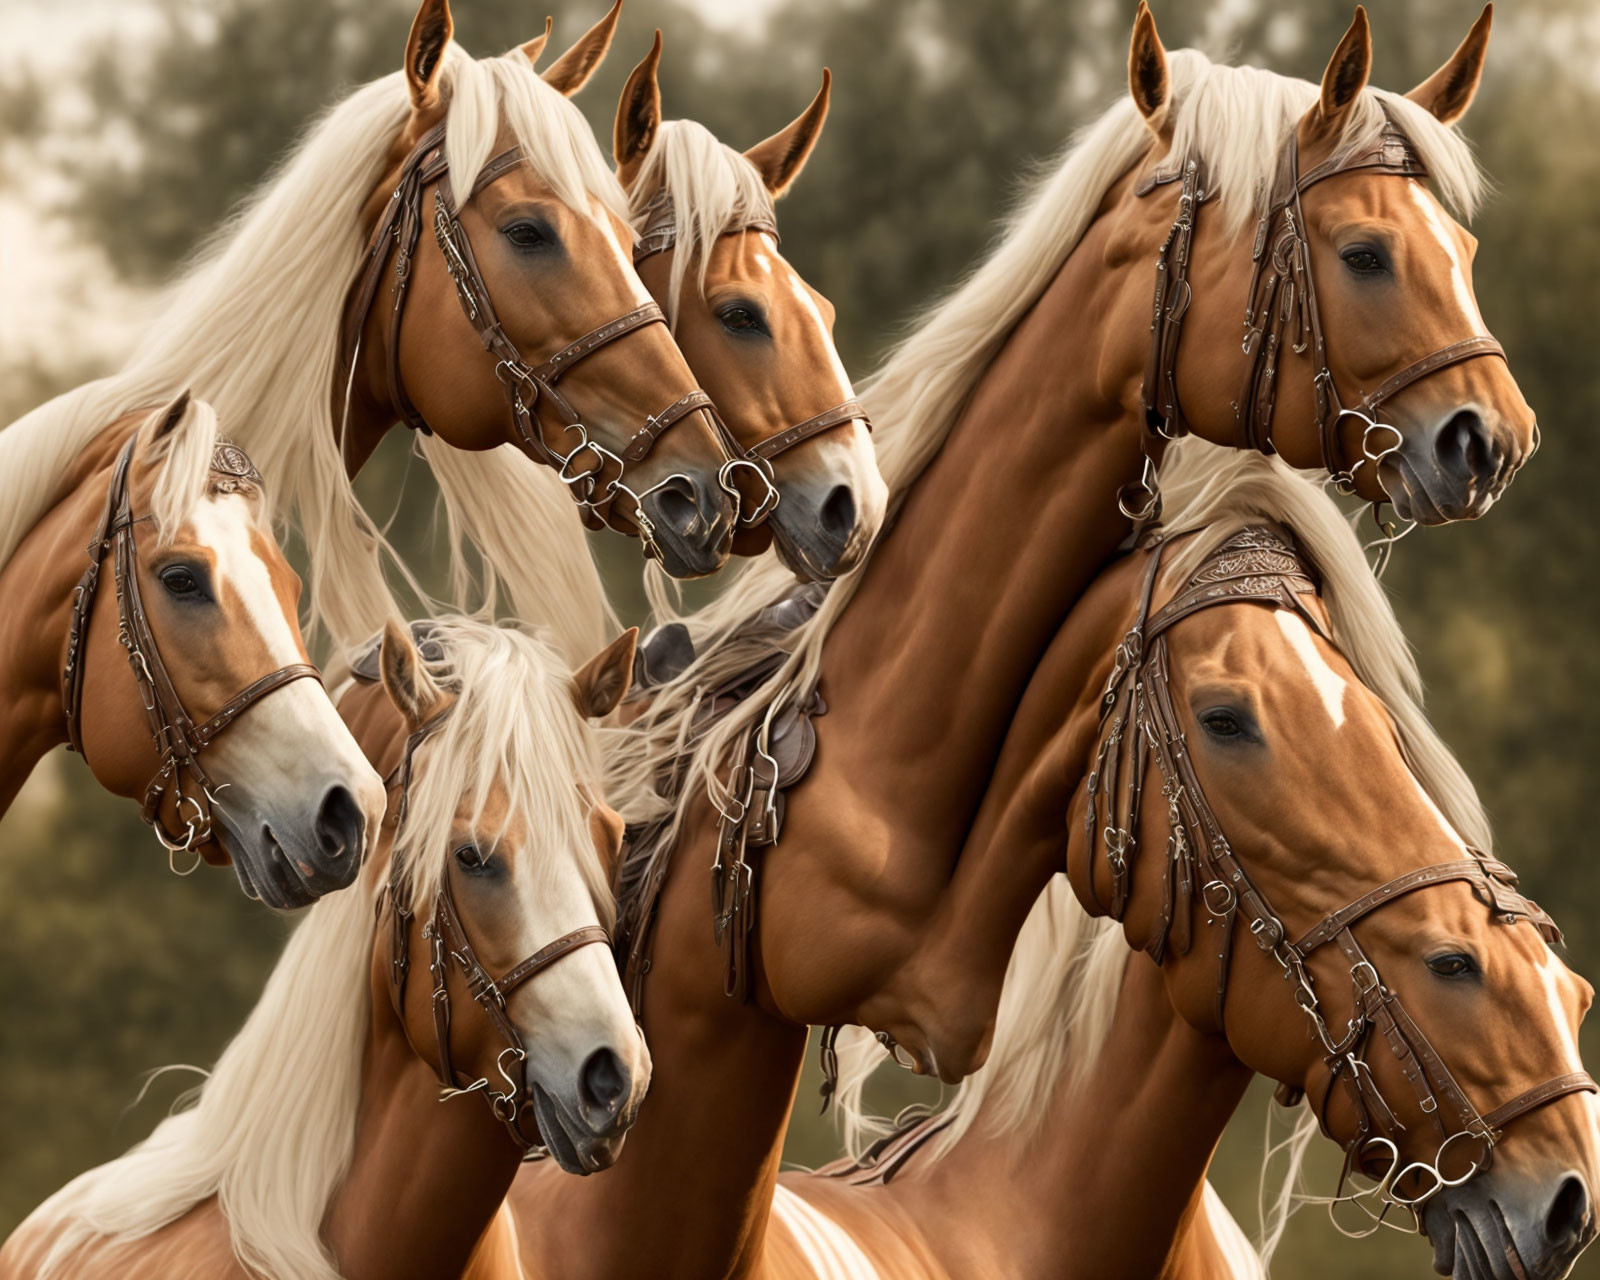 Five chestnut horses with white manes and bridles, grouped on blurred background